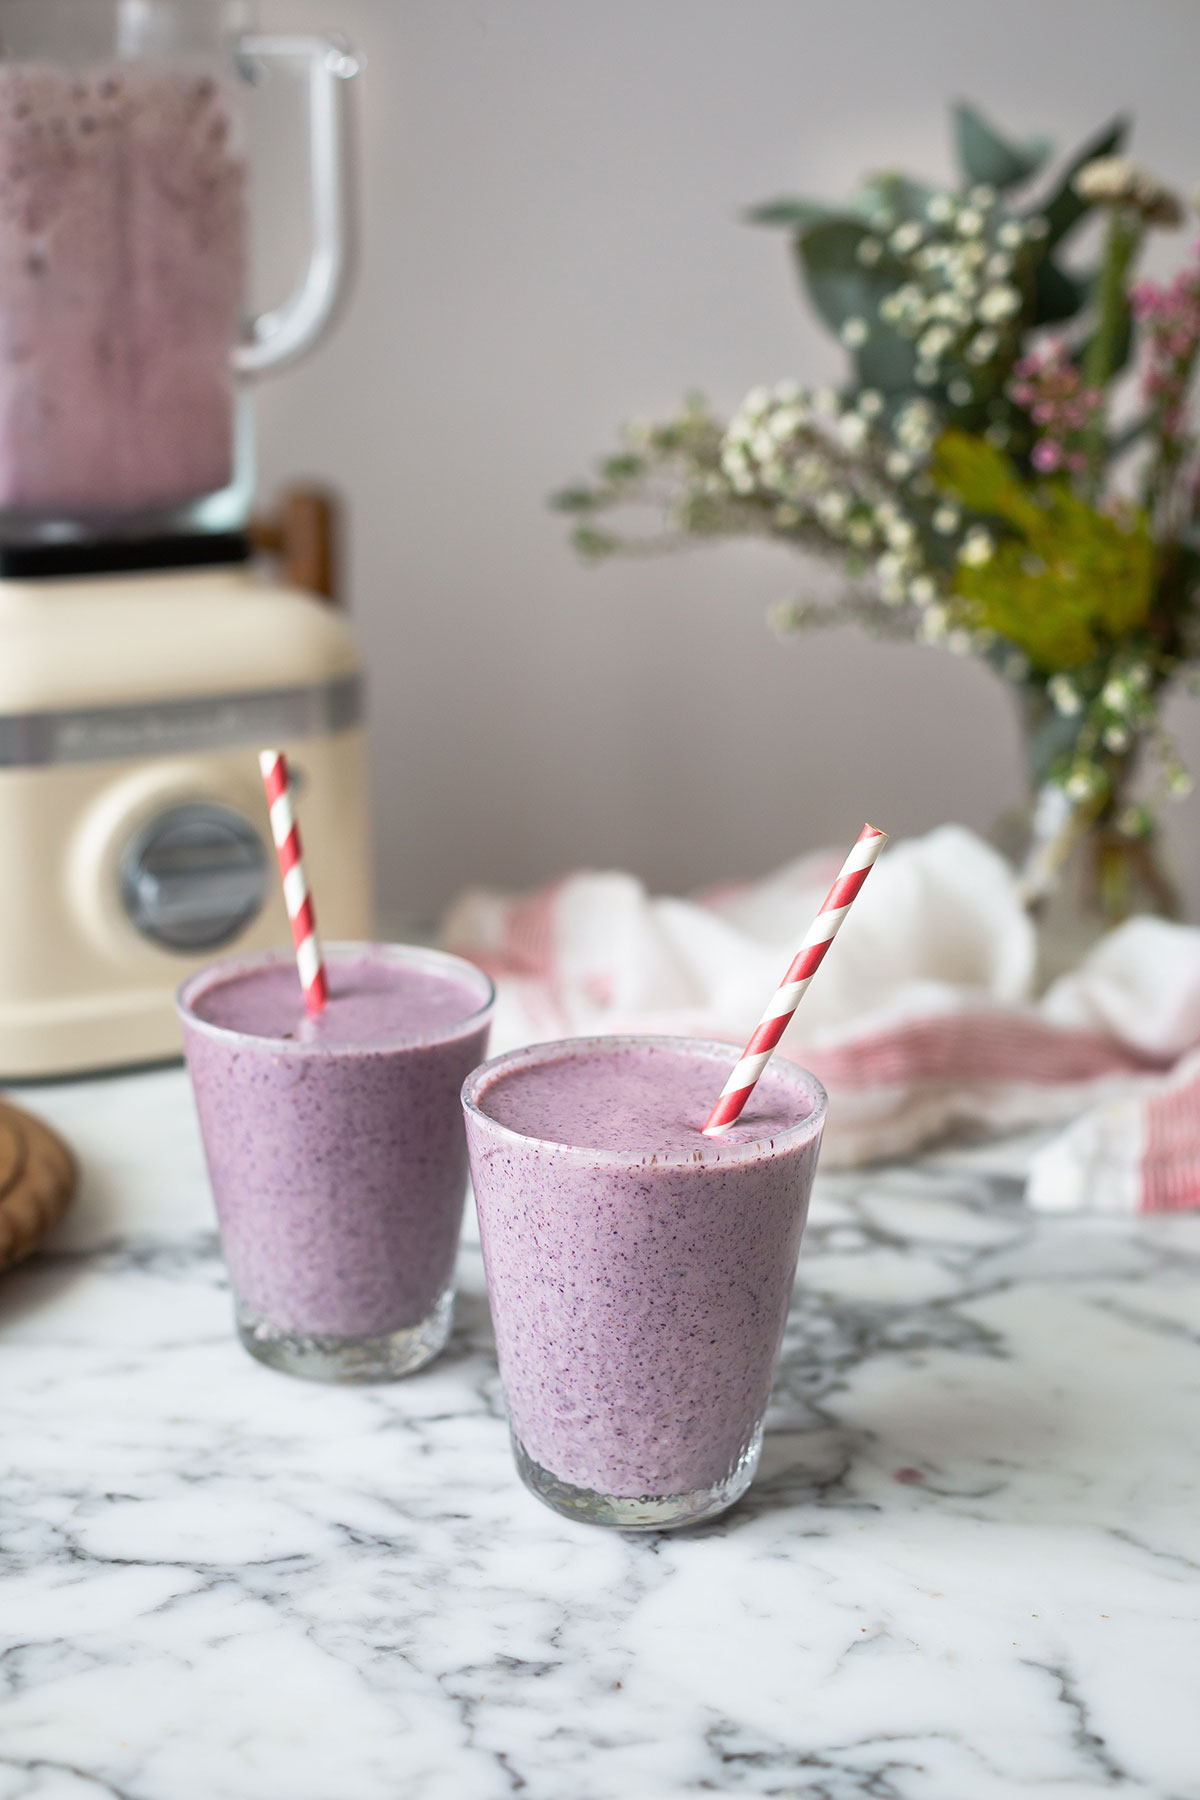 Healthy blueberry & banana protein smoothie